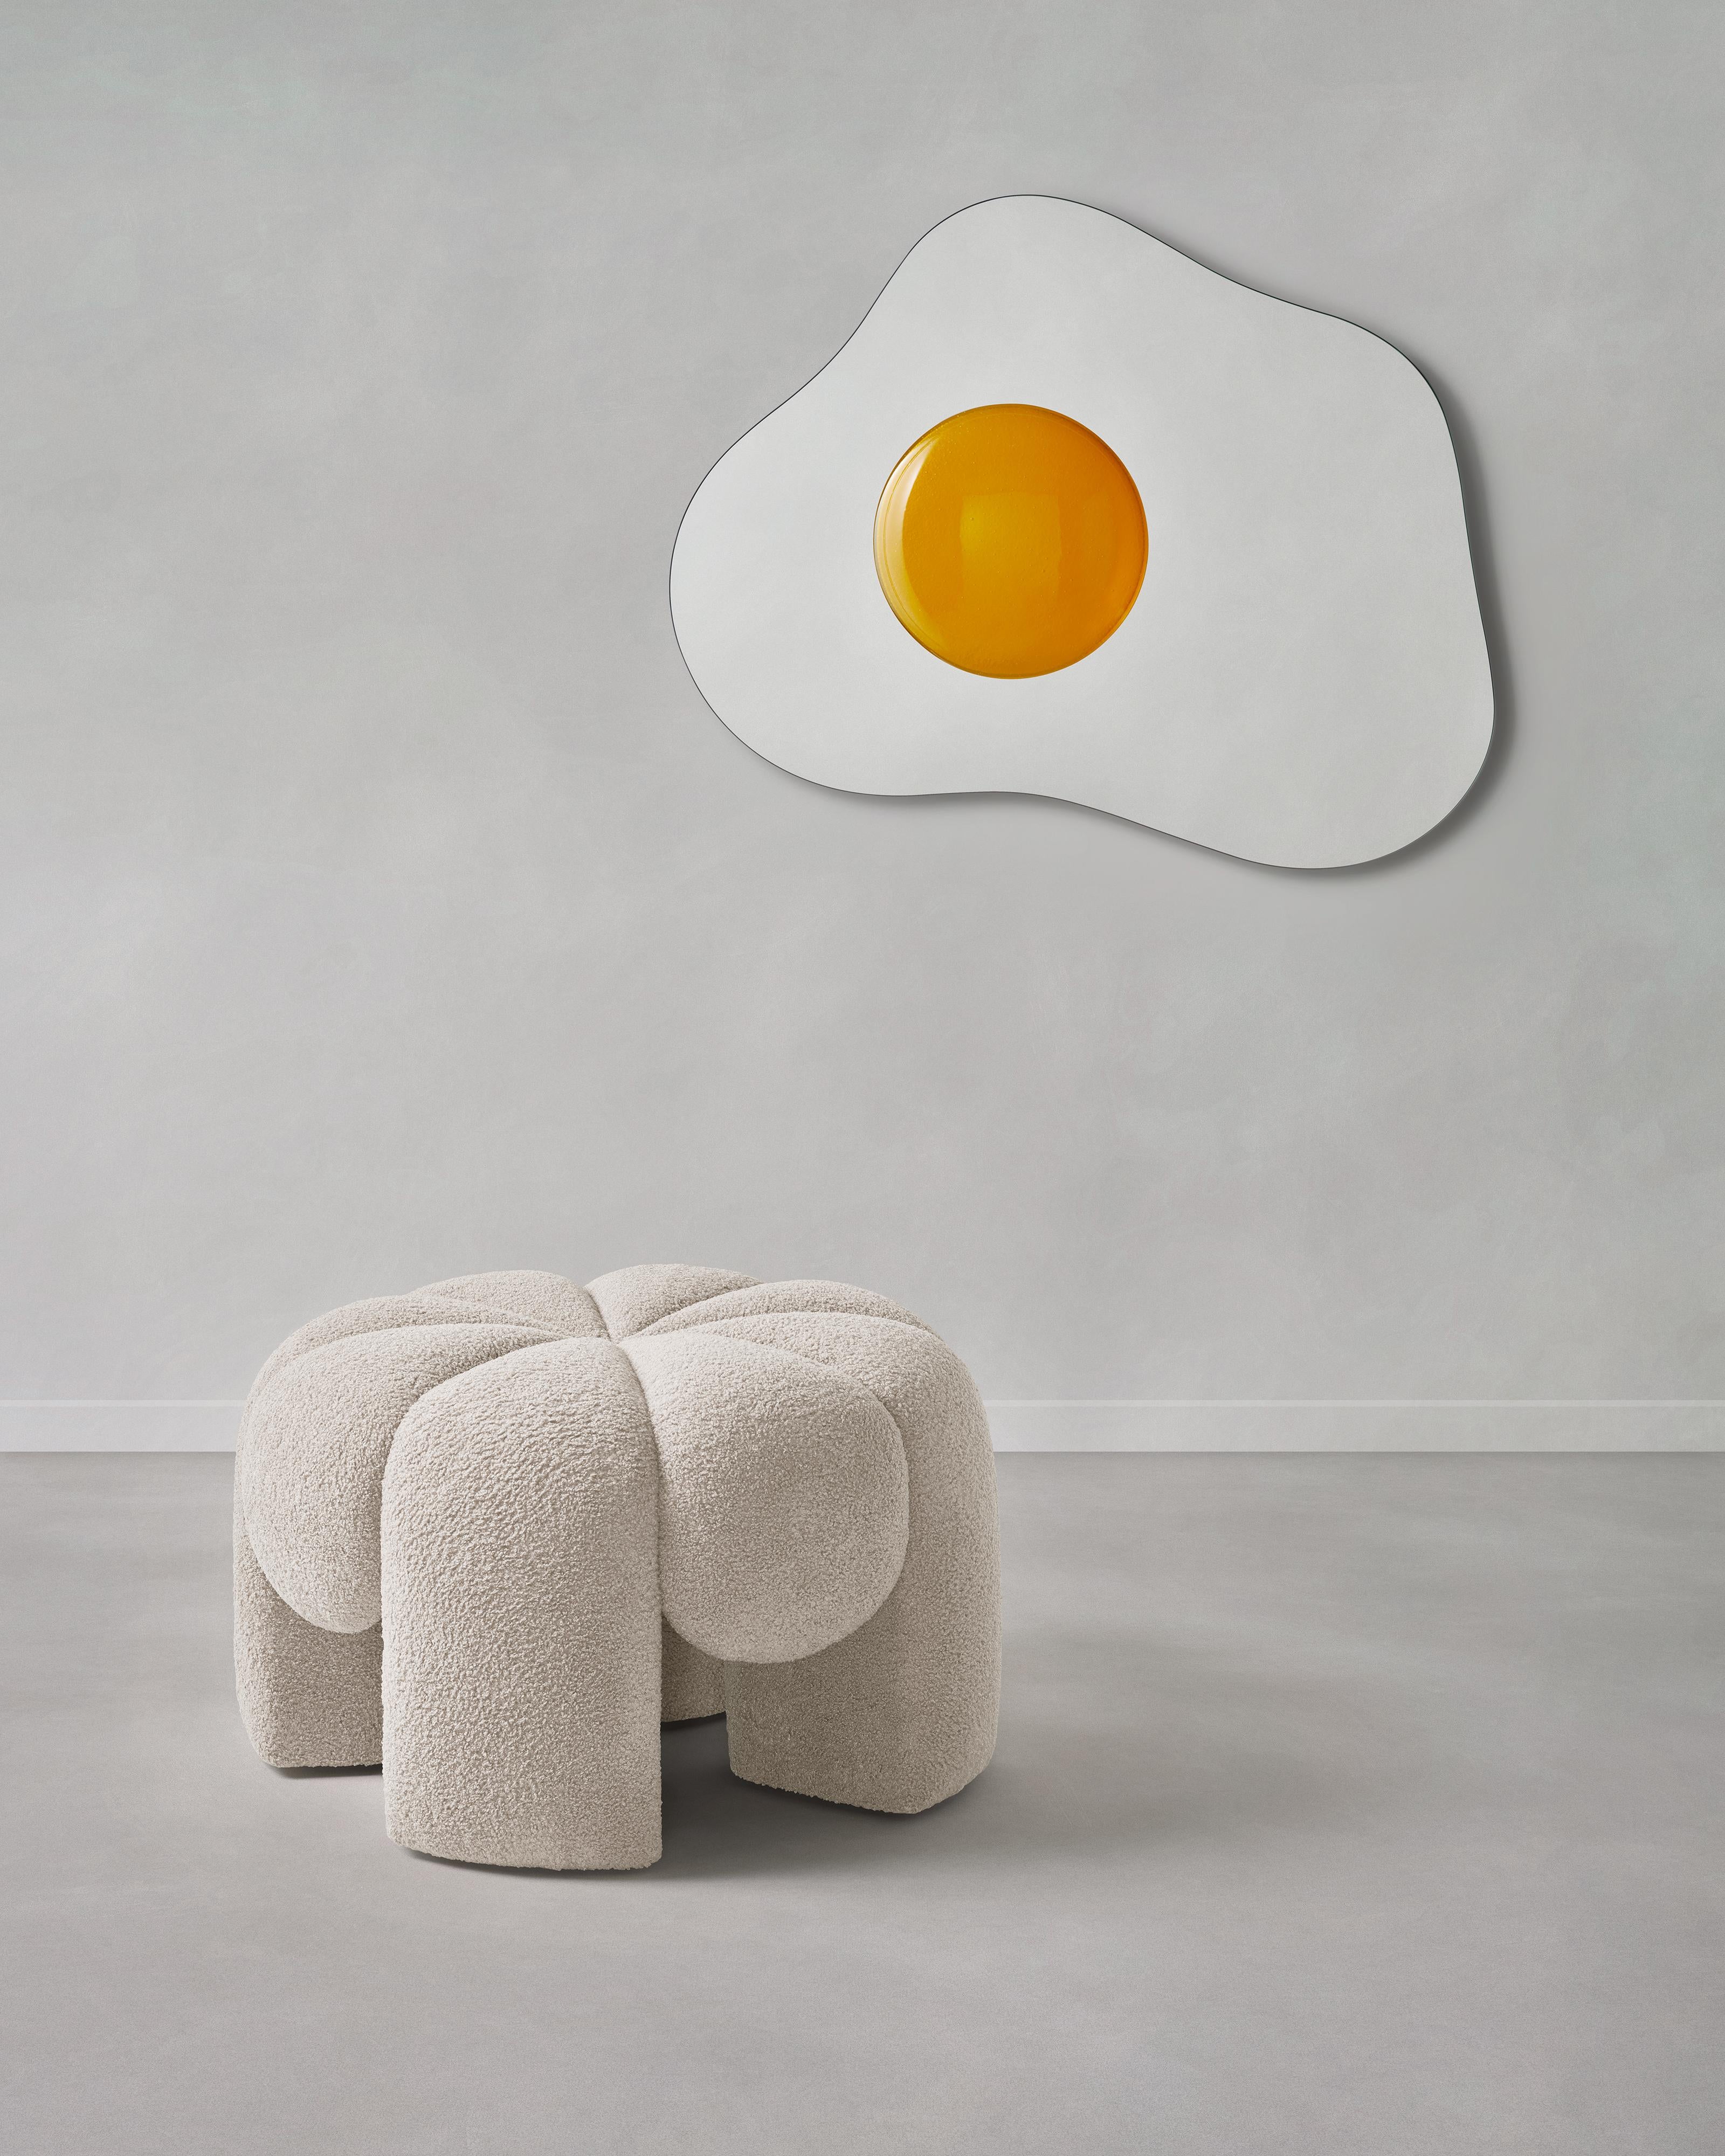 ‚Big Marshmallow‘ is a fluffy puffy pouf designed by Paul Ketz. 

Inspired by the natural drip and motion of rising and overflowing dough the design interweaves classic elegance and playfulness.

Big Marshmallow is upholstered with an exclusive